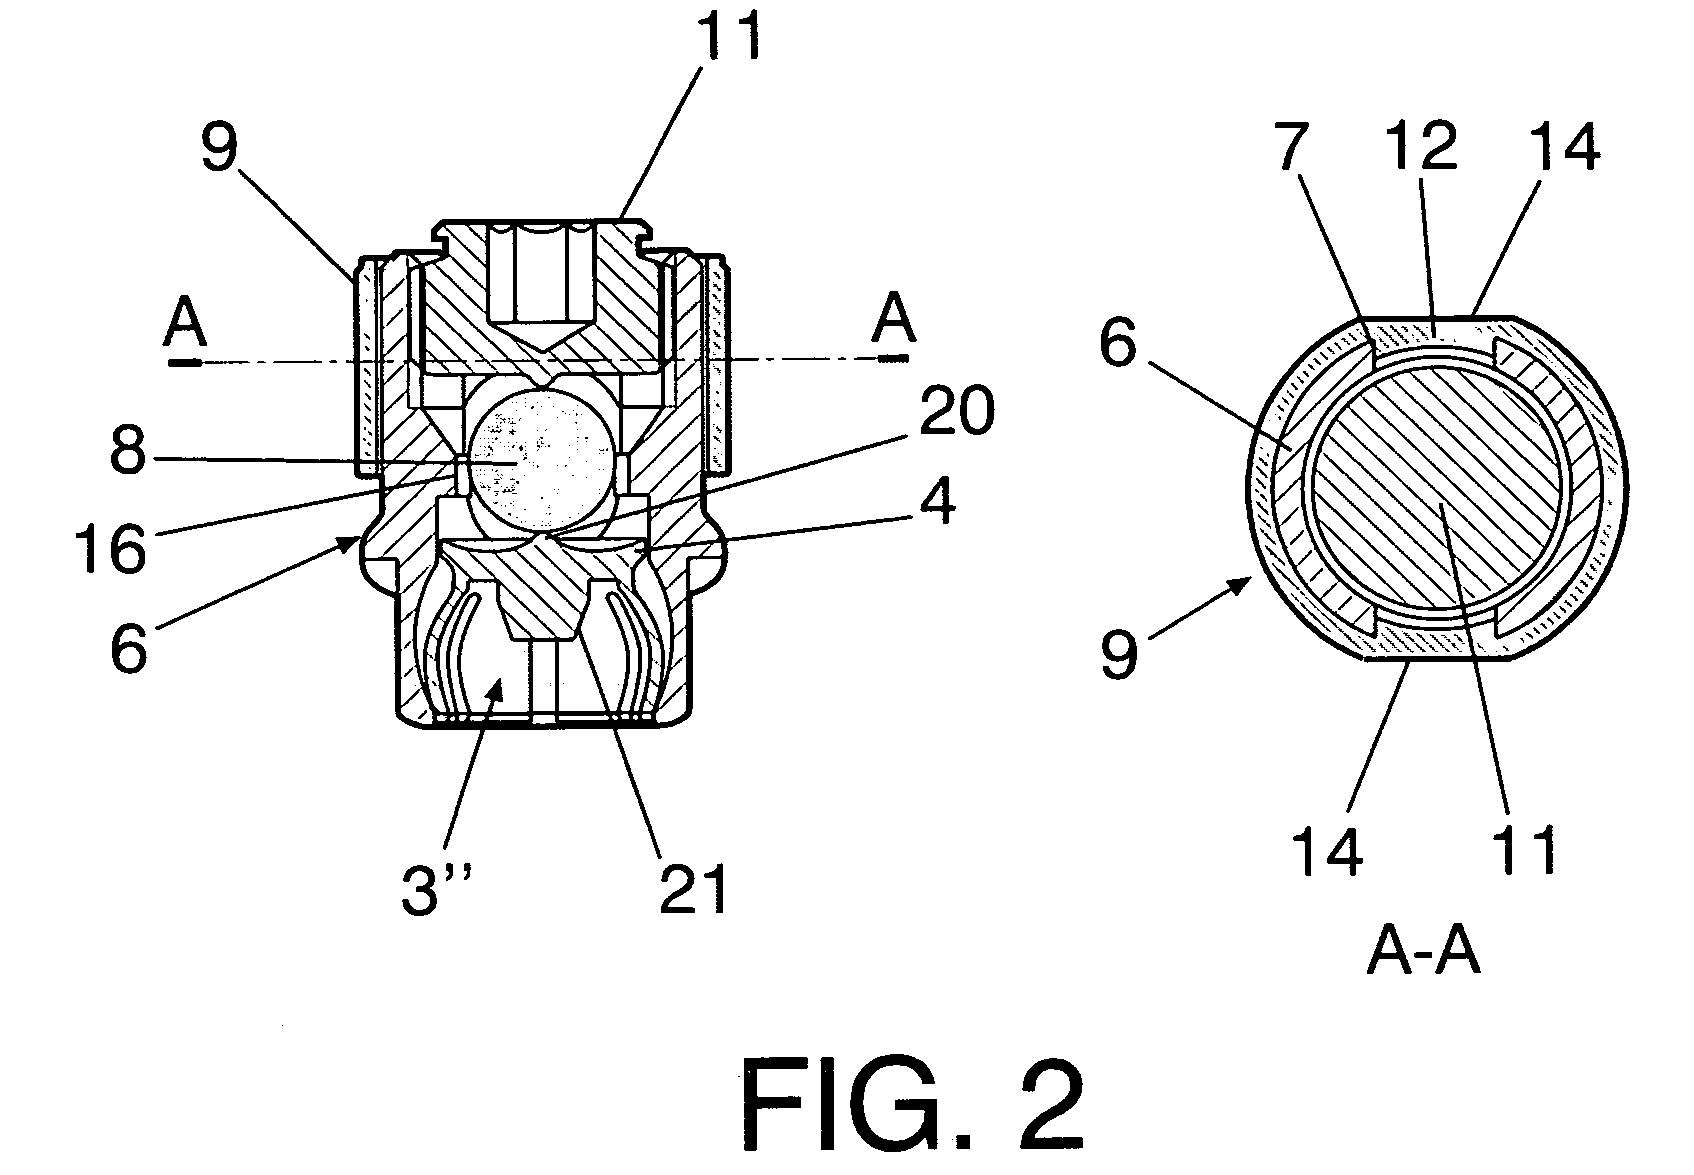 Vertebral fixation device and tool for assembling the device